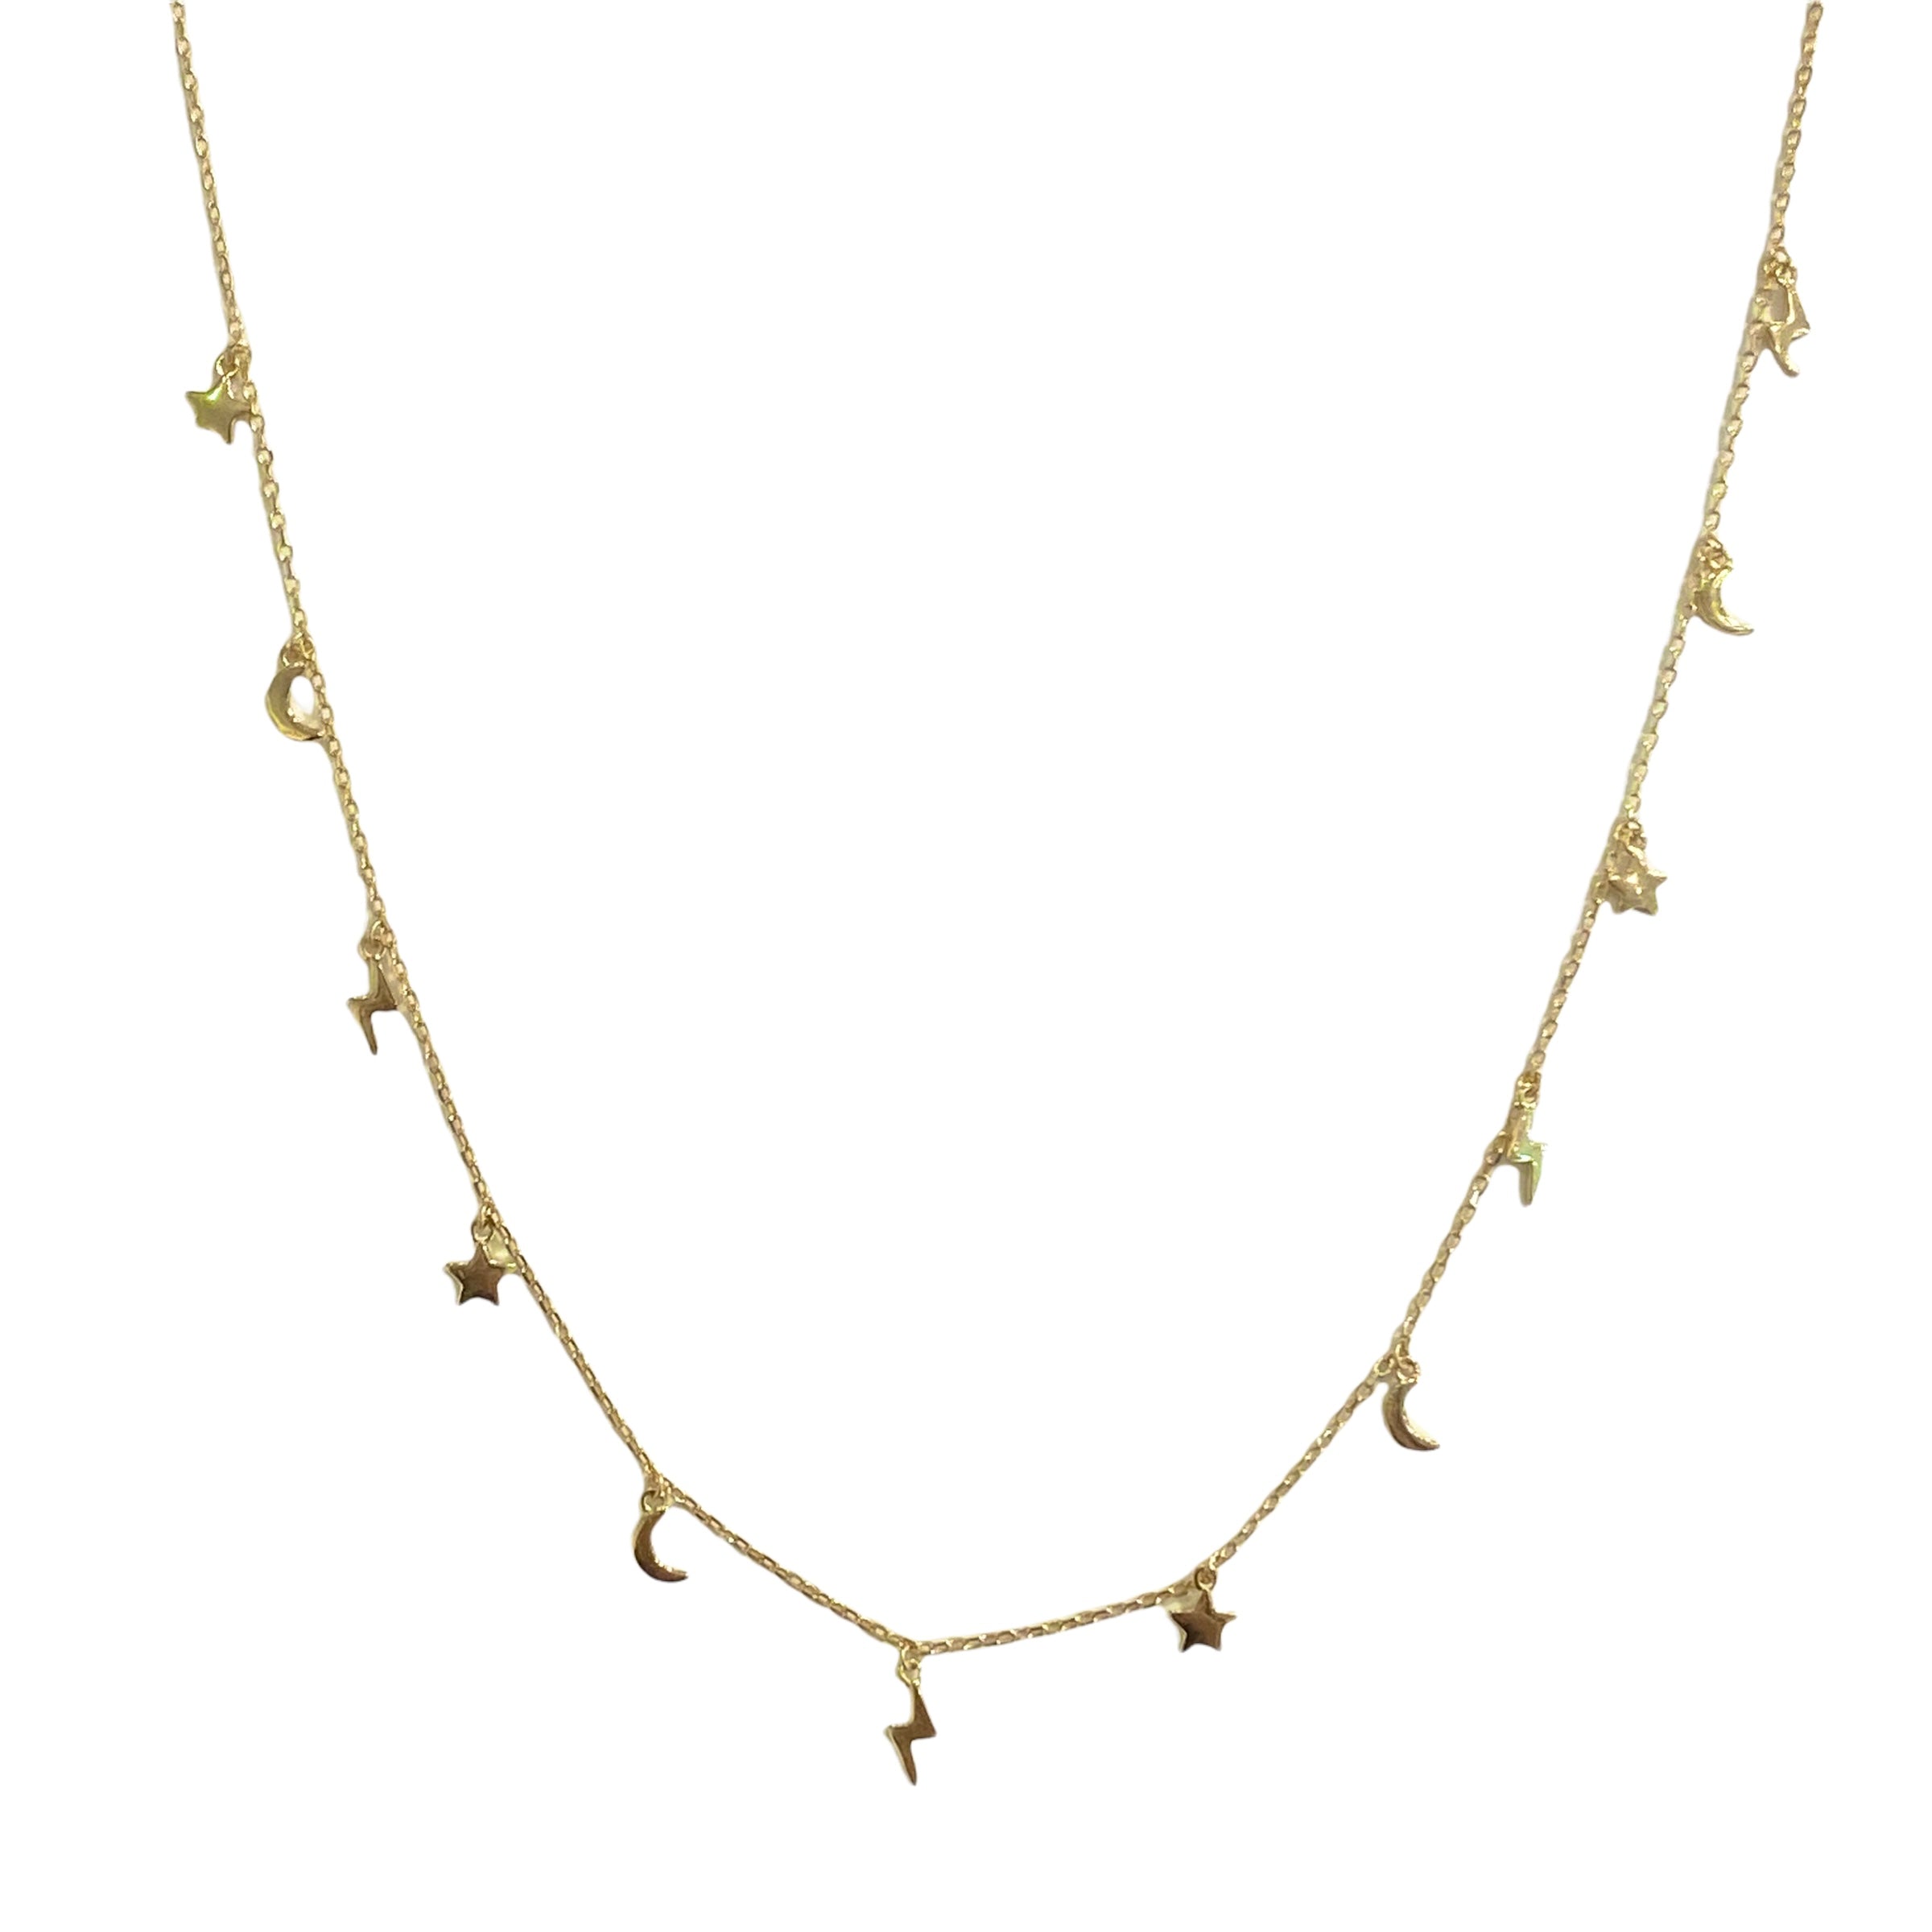 Celestial Starley Moon Necklace